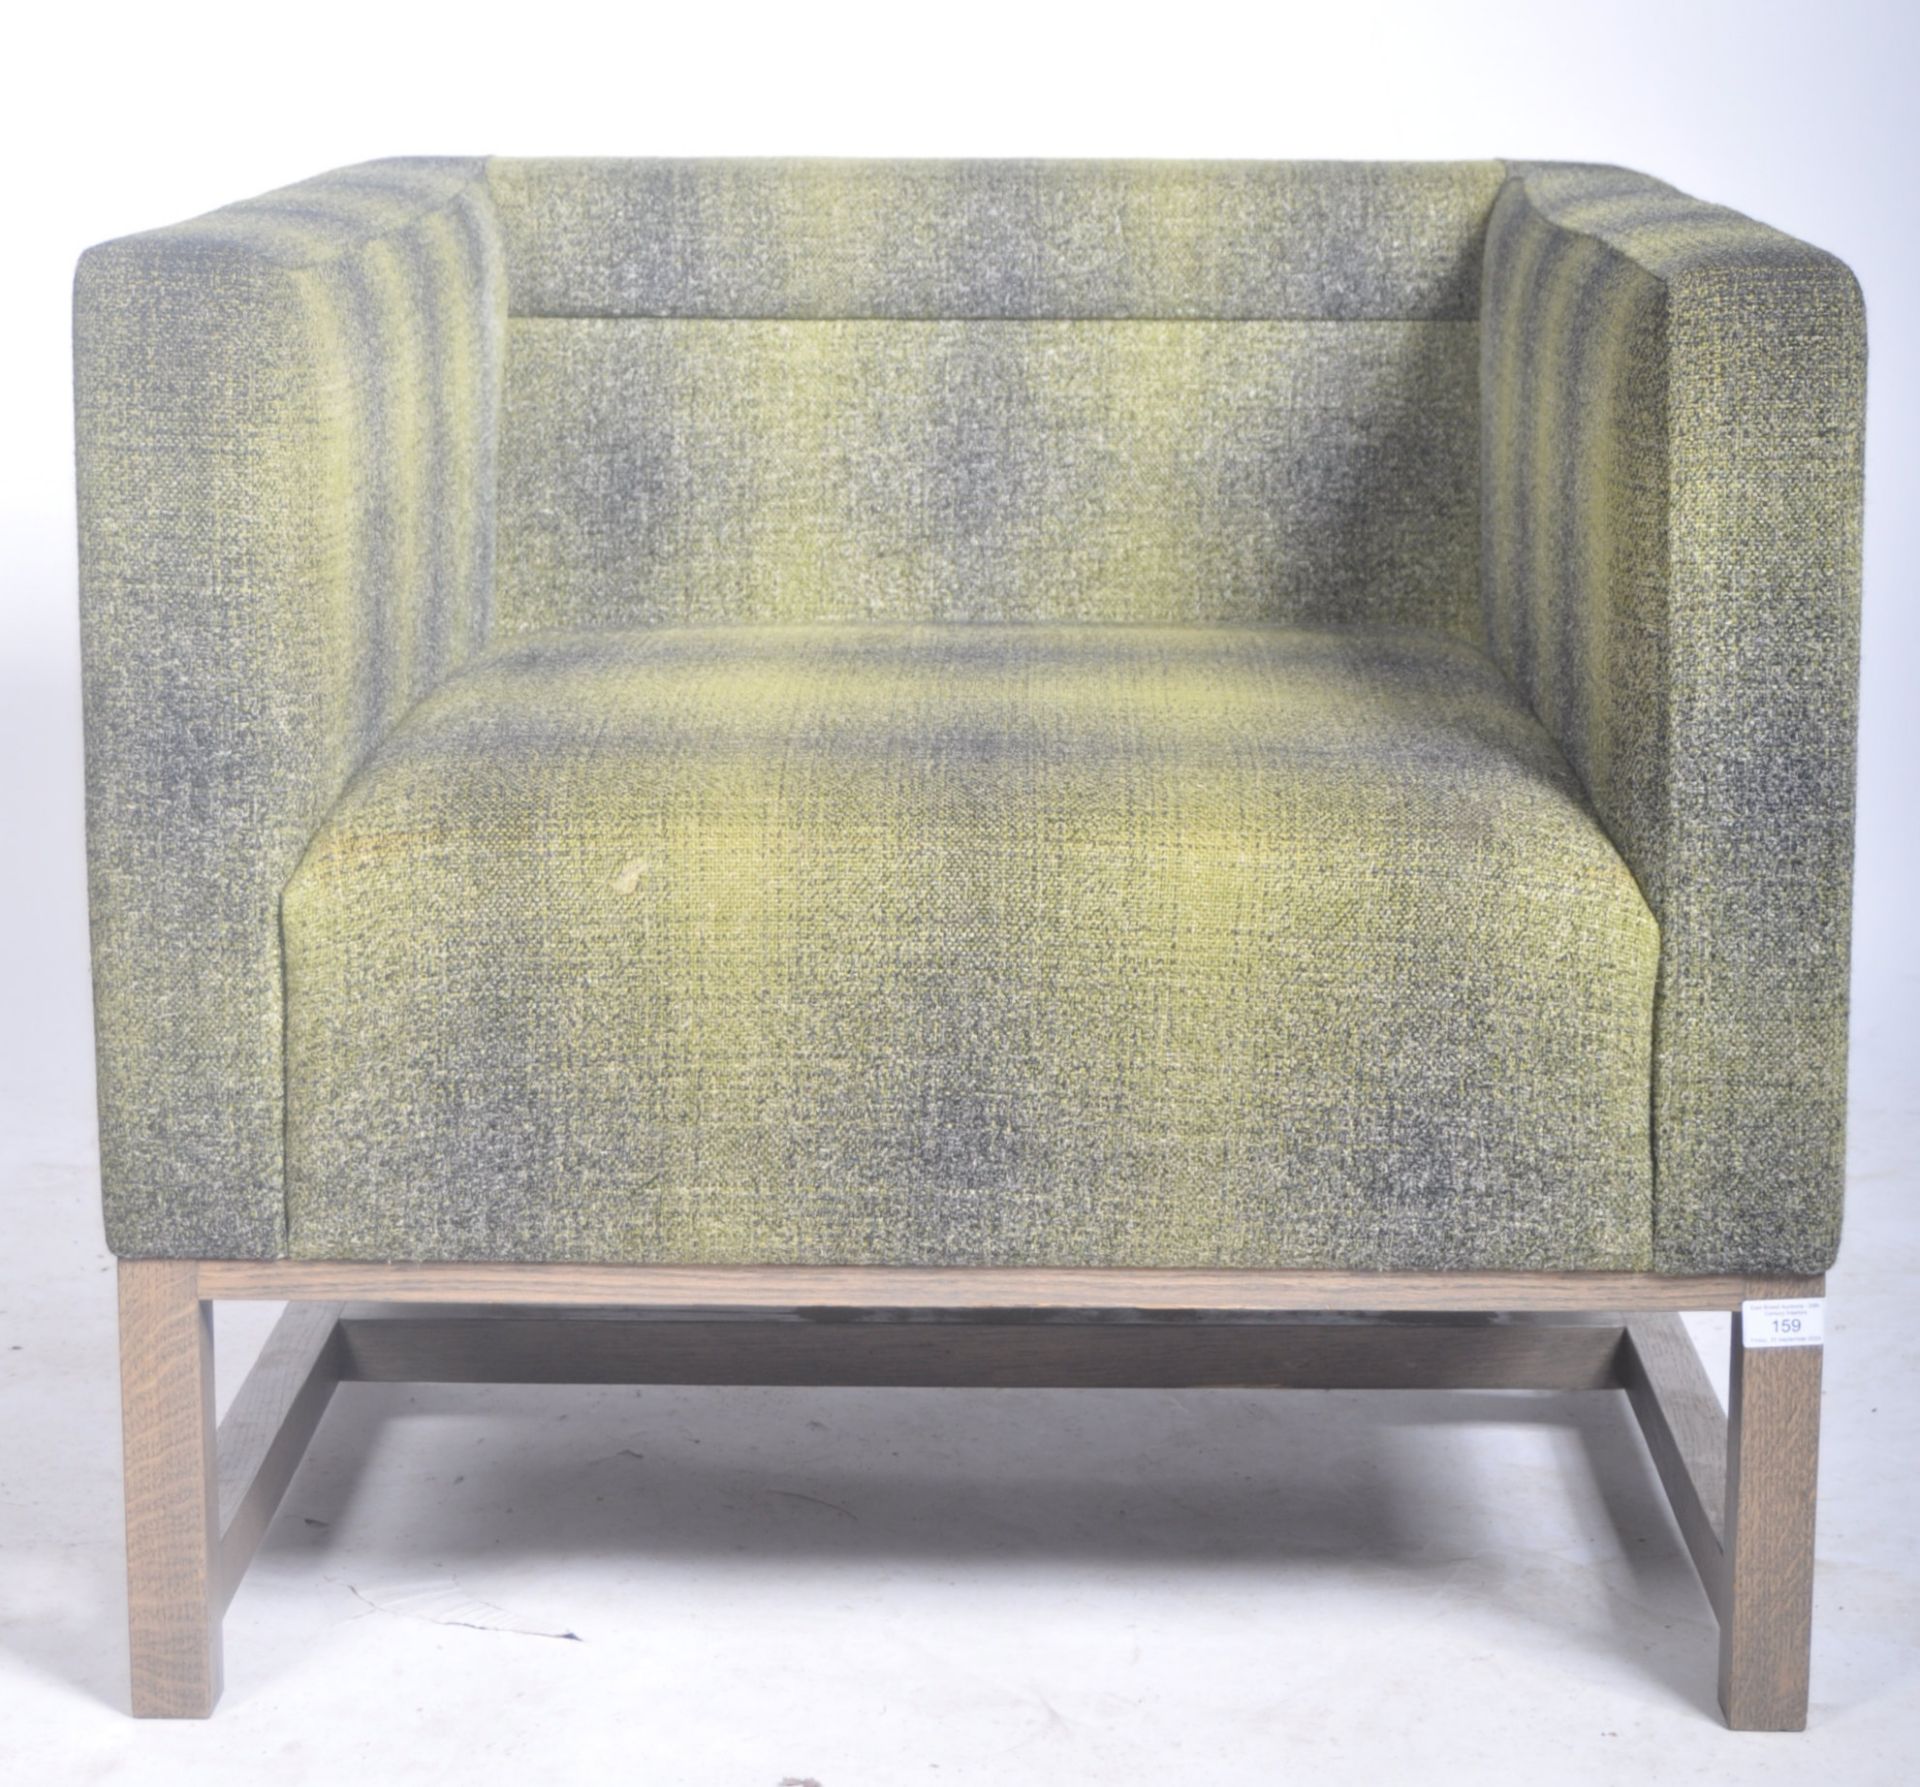 LYNDON DESIGN - ORTEN ARMCHAIR / LOUNGE CHAIR UPHOLSTERED IN GREEN AND GREY